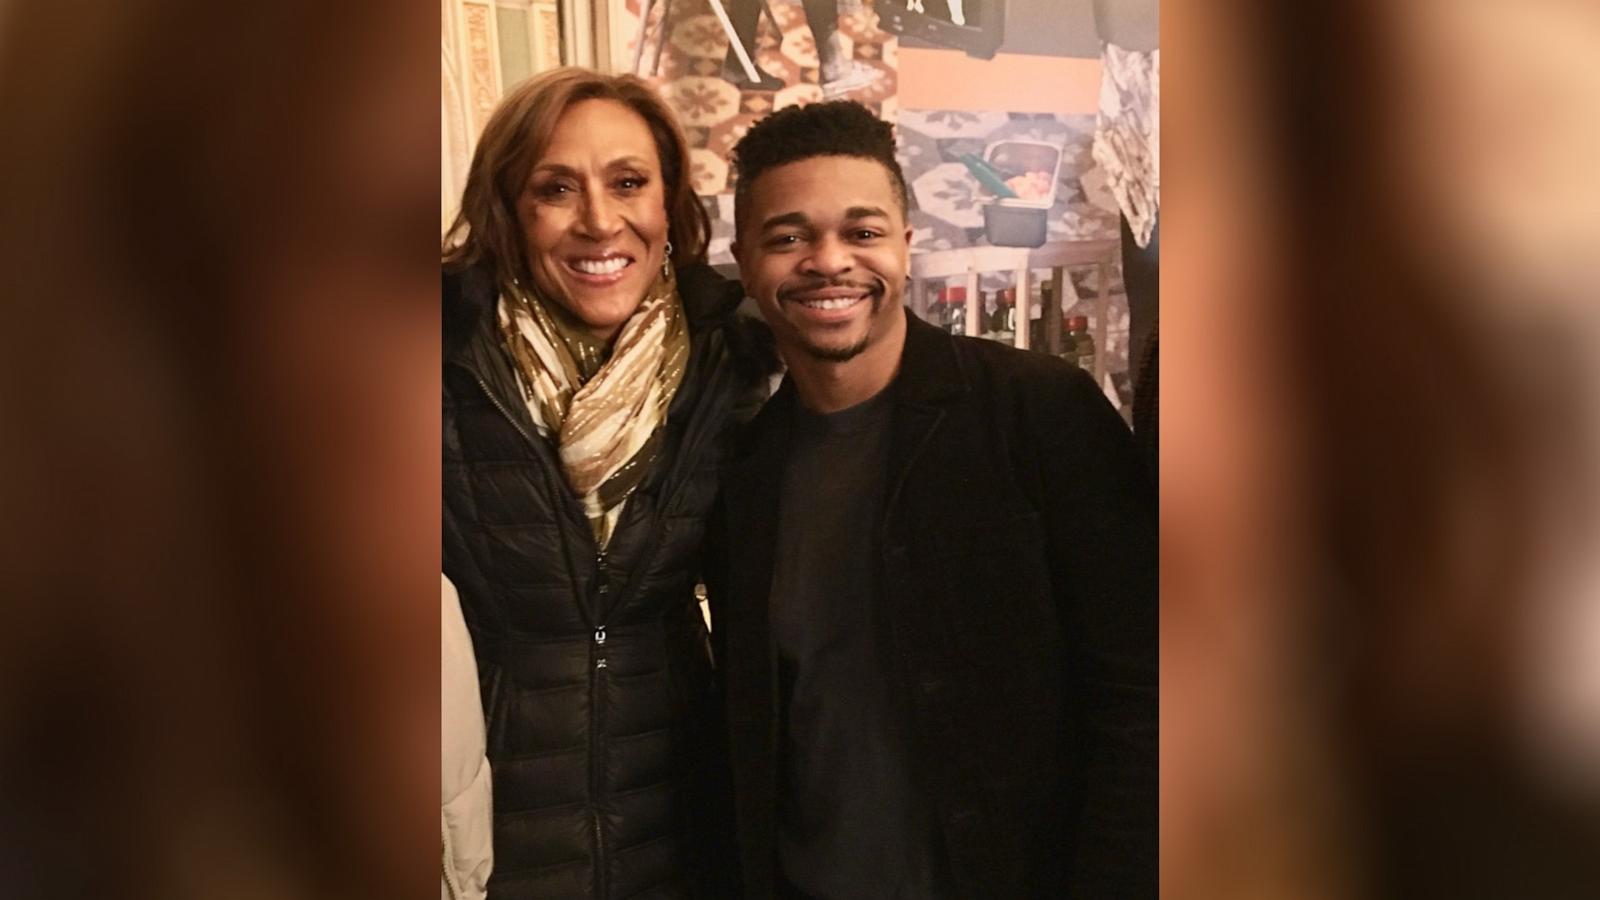 PHOTO: "Good Morning America" co-anchor Robin Roberts poses with her nephew, Jeremiah Craft.